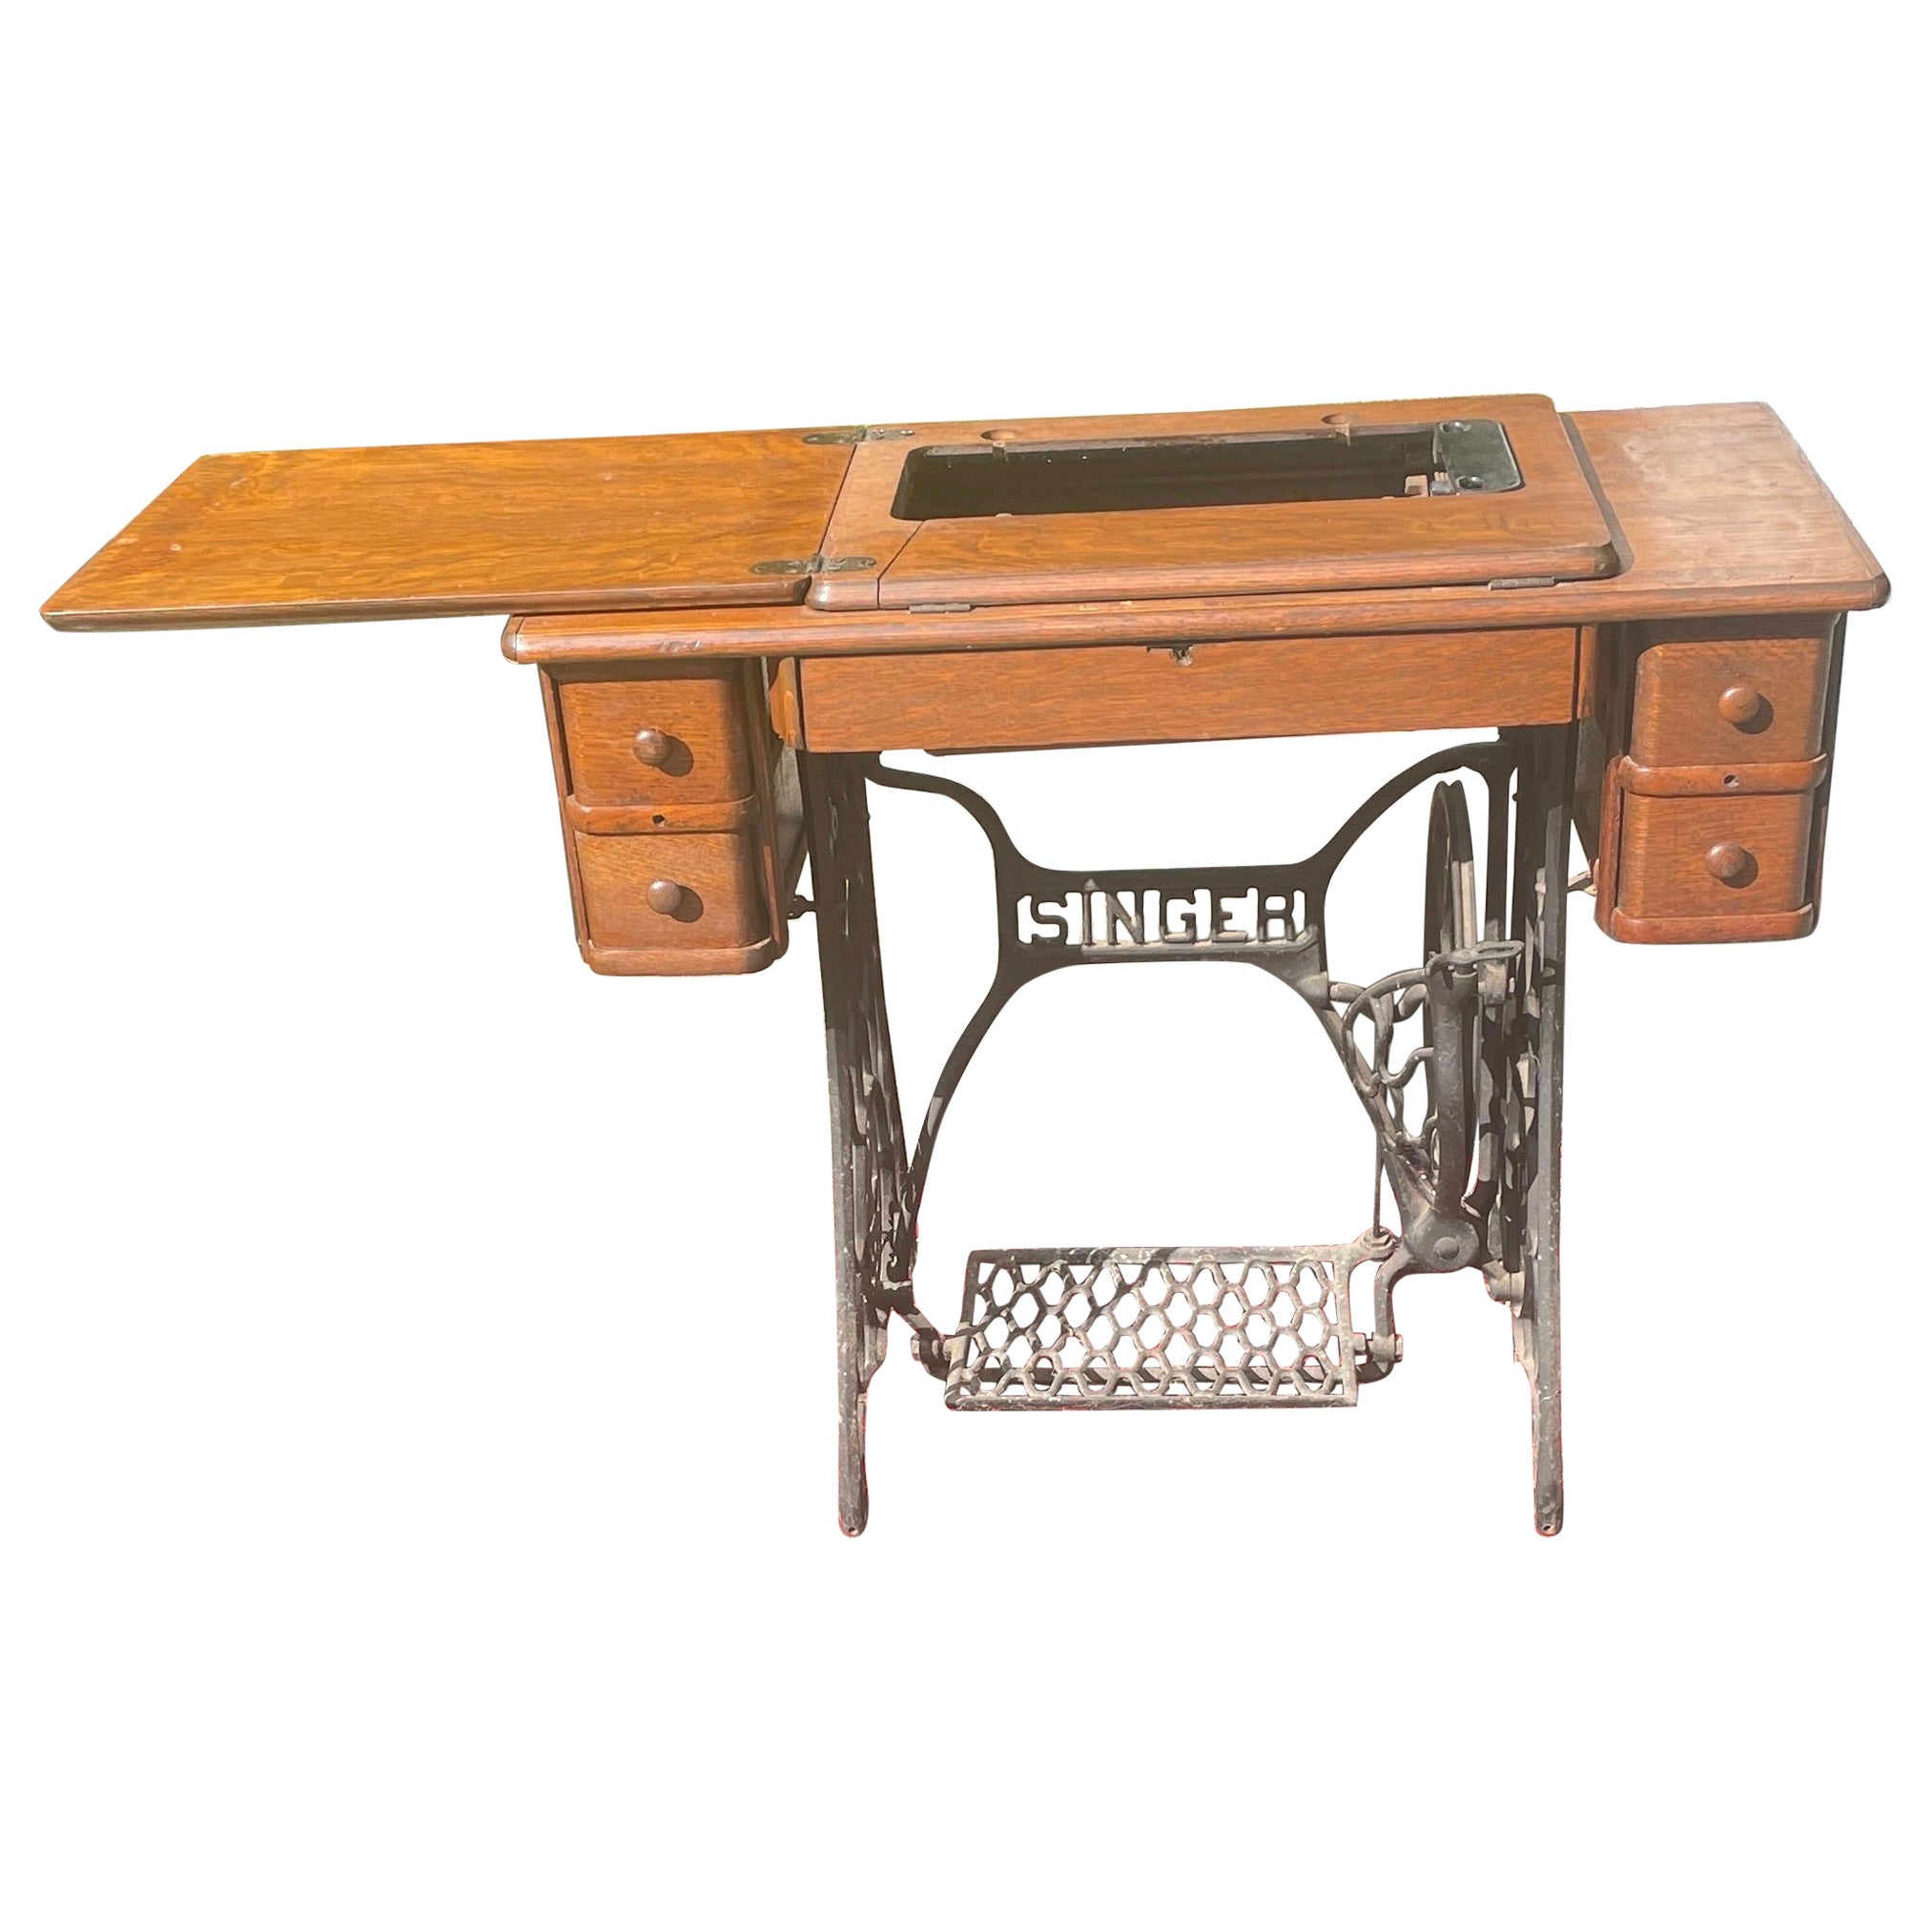 Vintage Singer Sewing Machine - Work Table For Sale